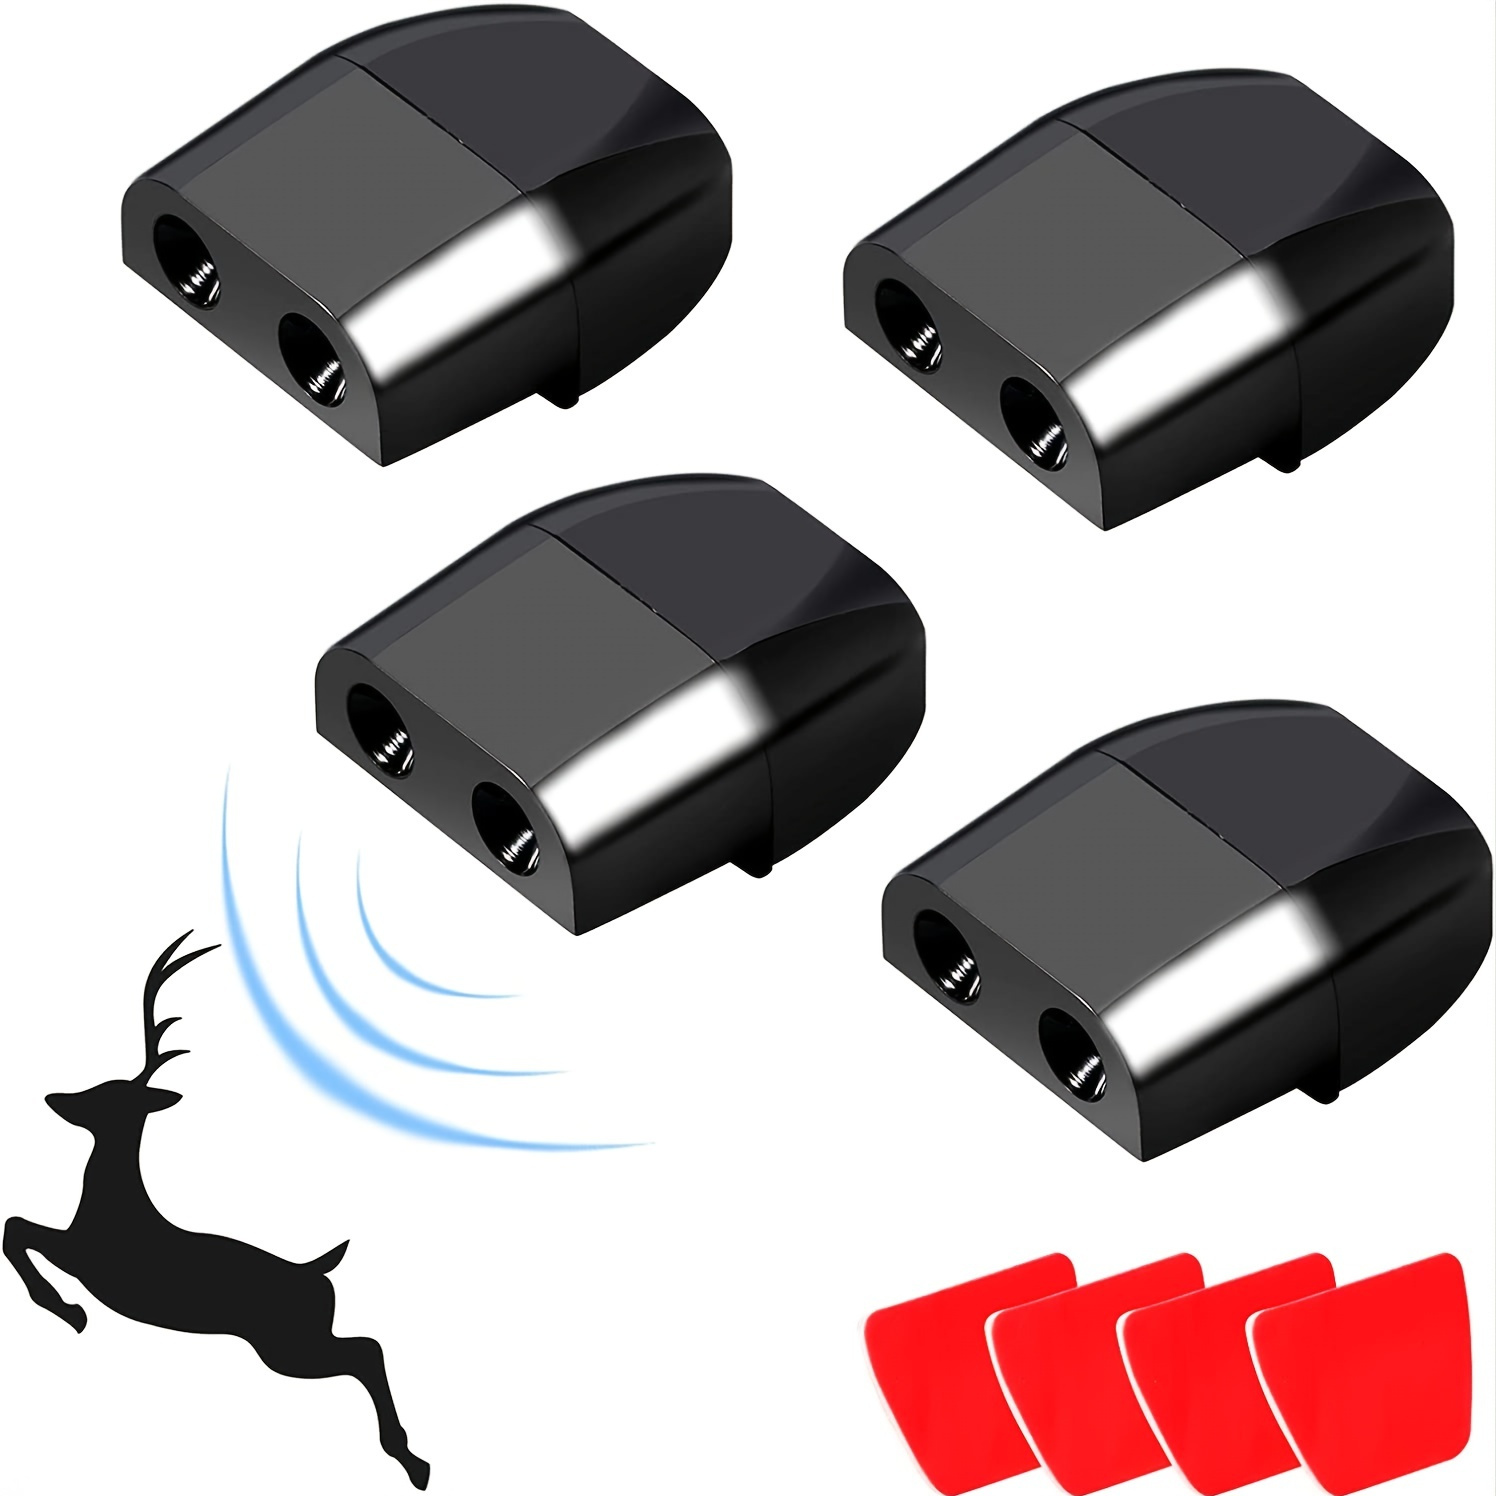 Deer Whistle Car Auto Automotive Interior Safety Products Animal Warning  Devices